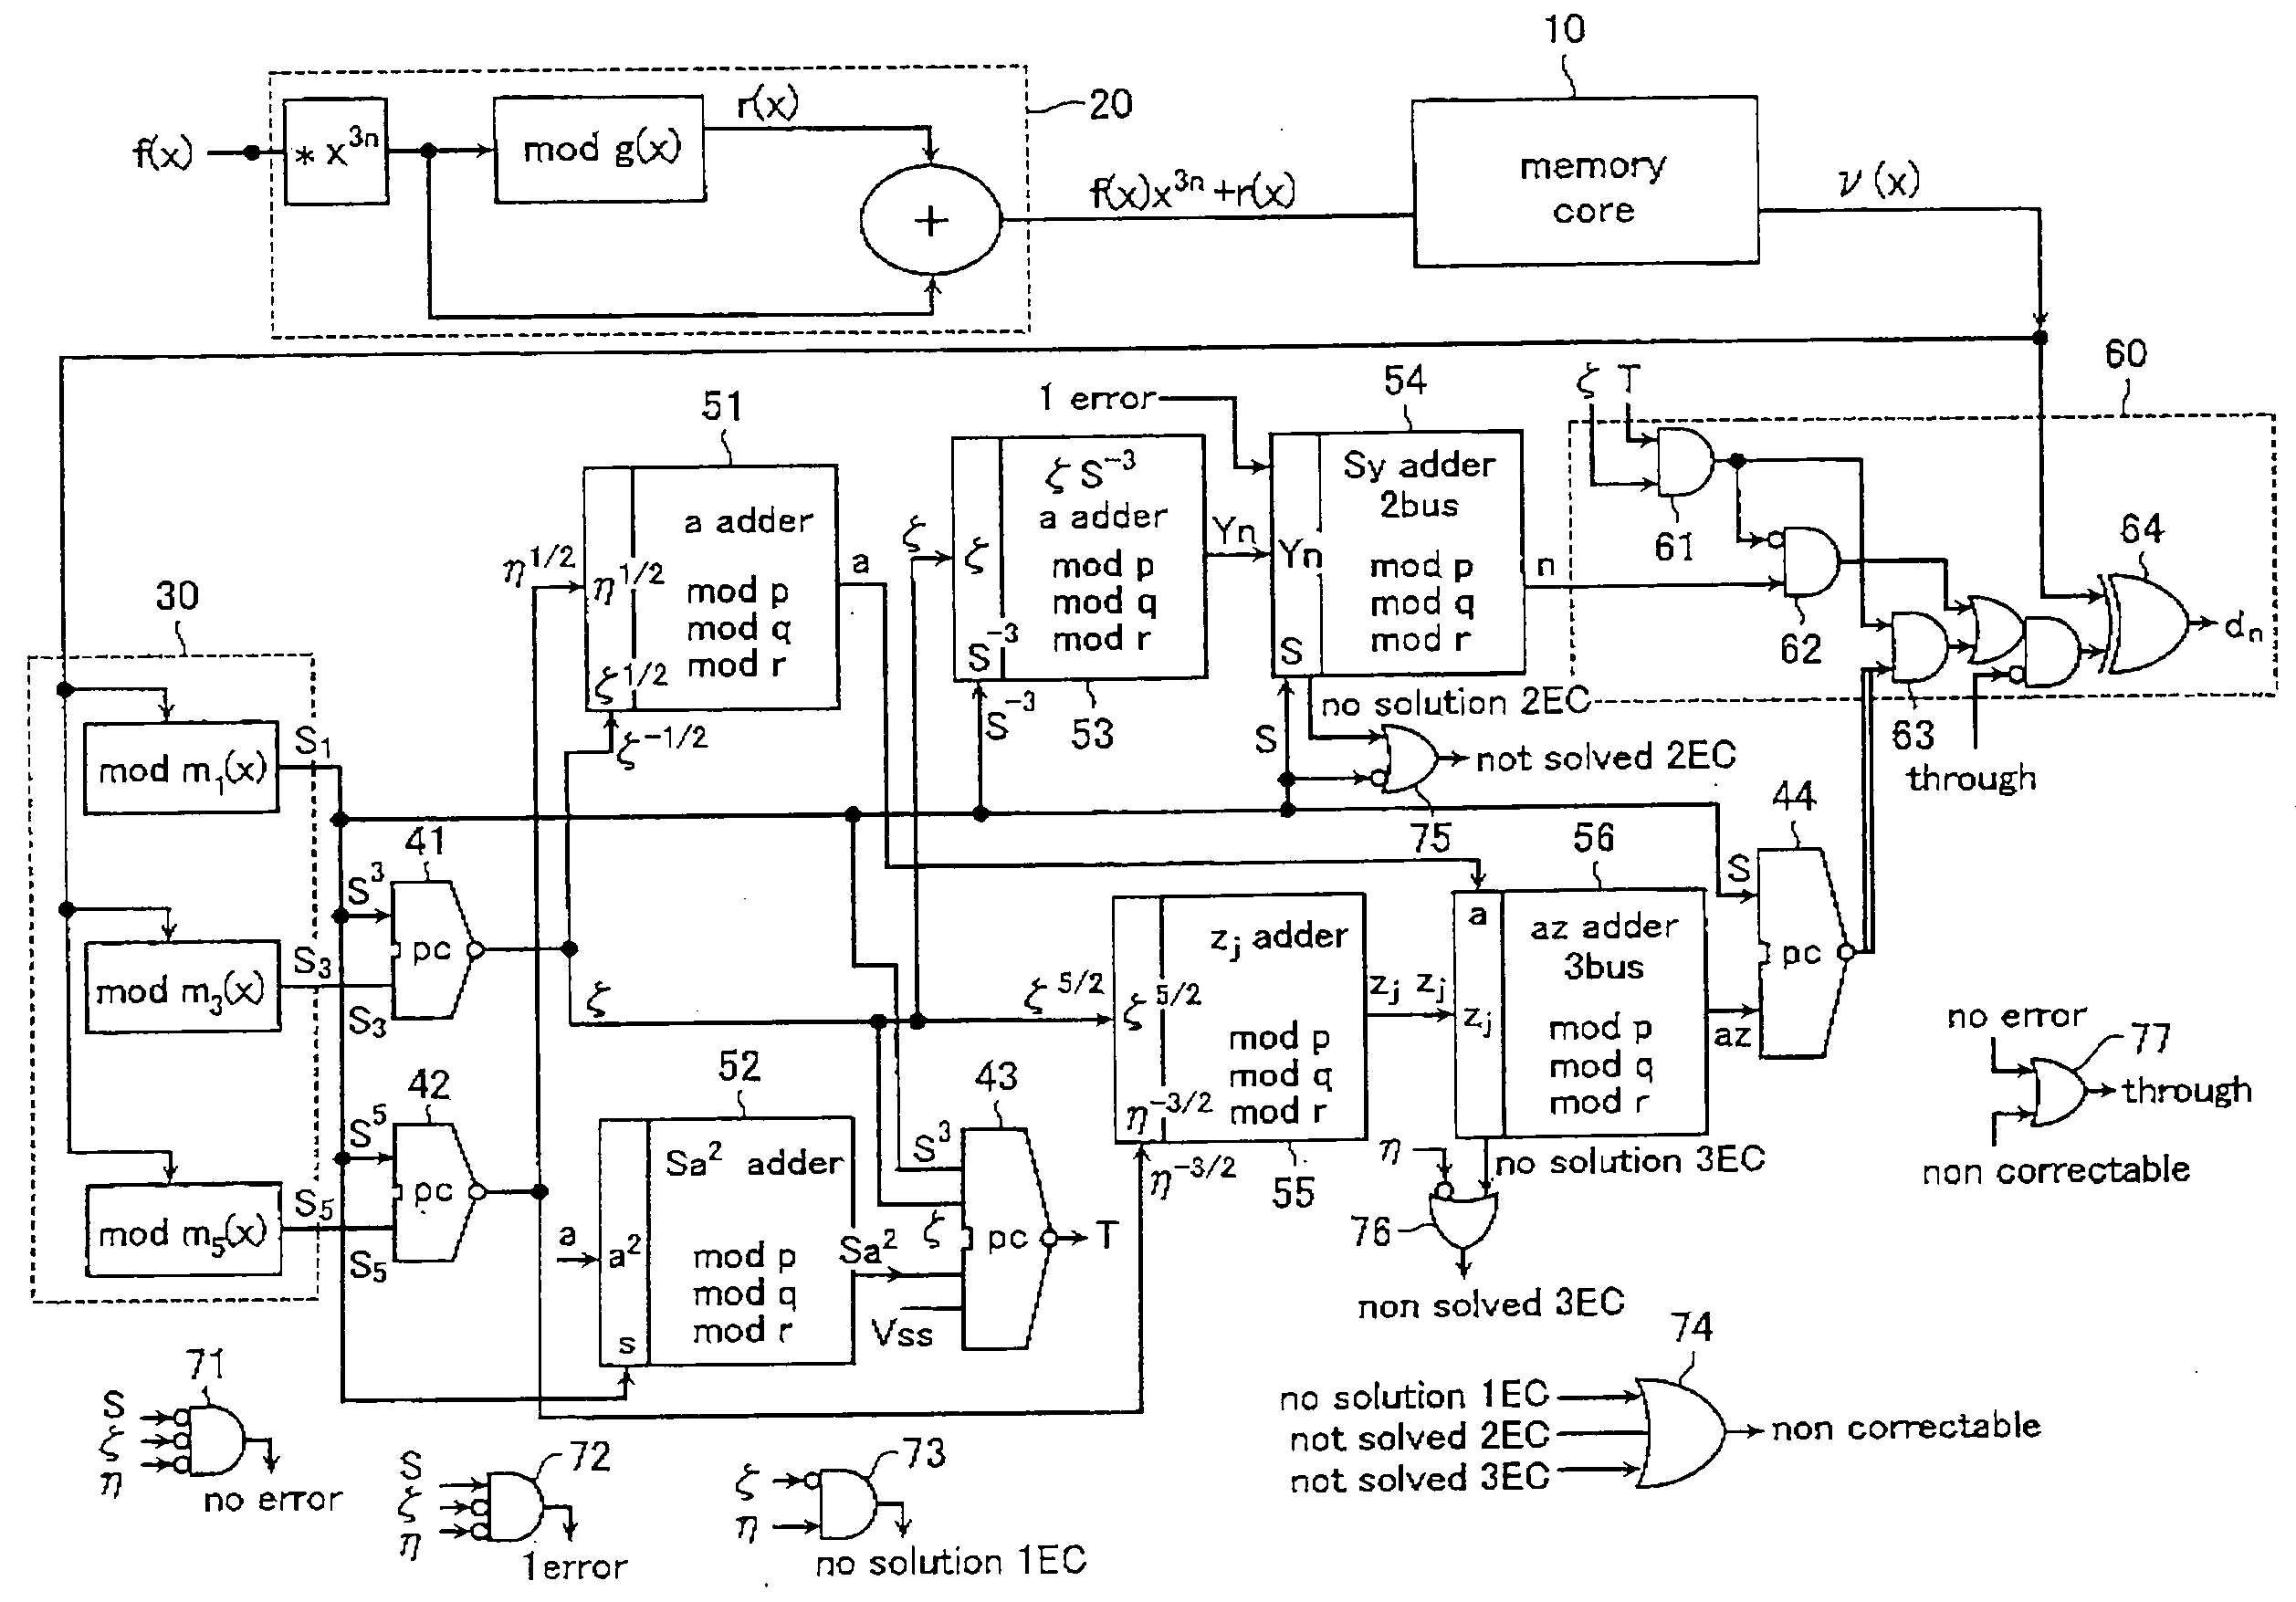 Memory device with an ecc system